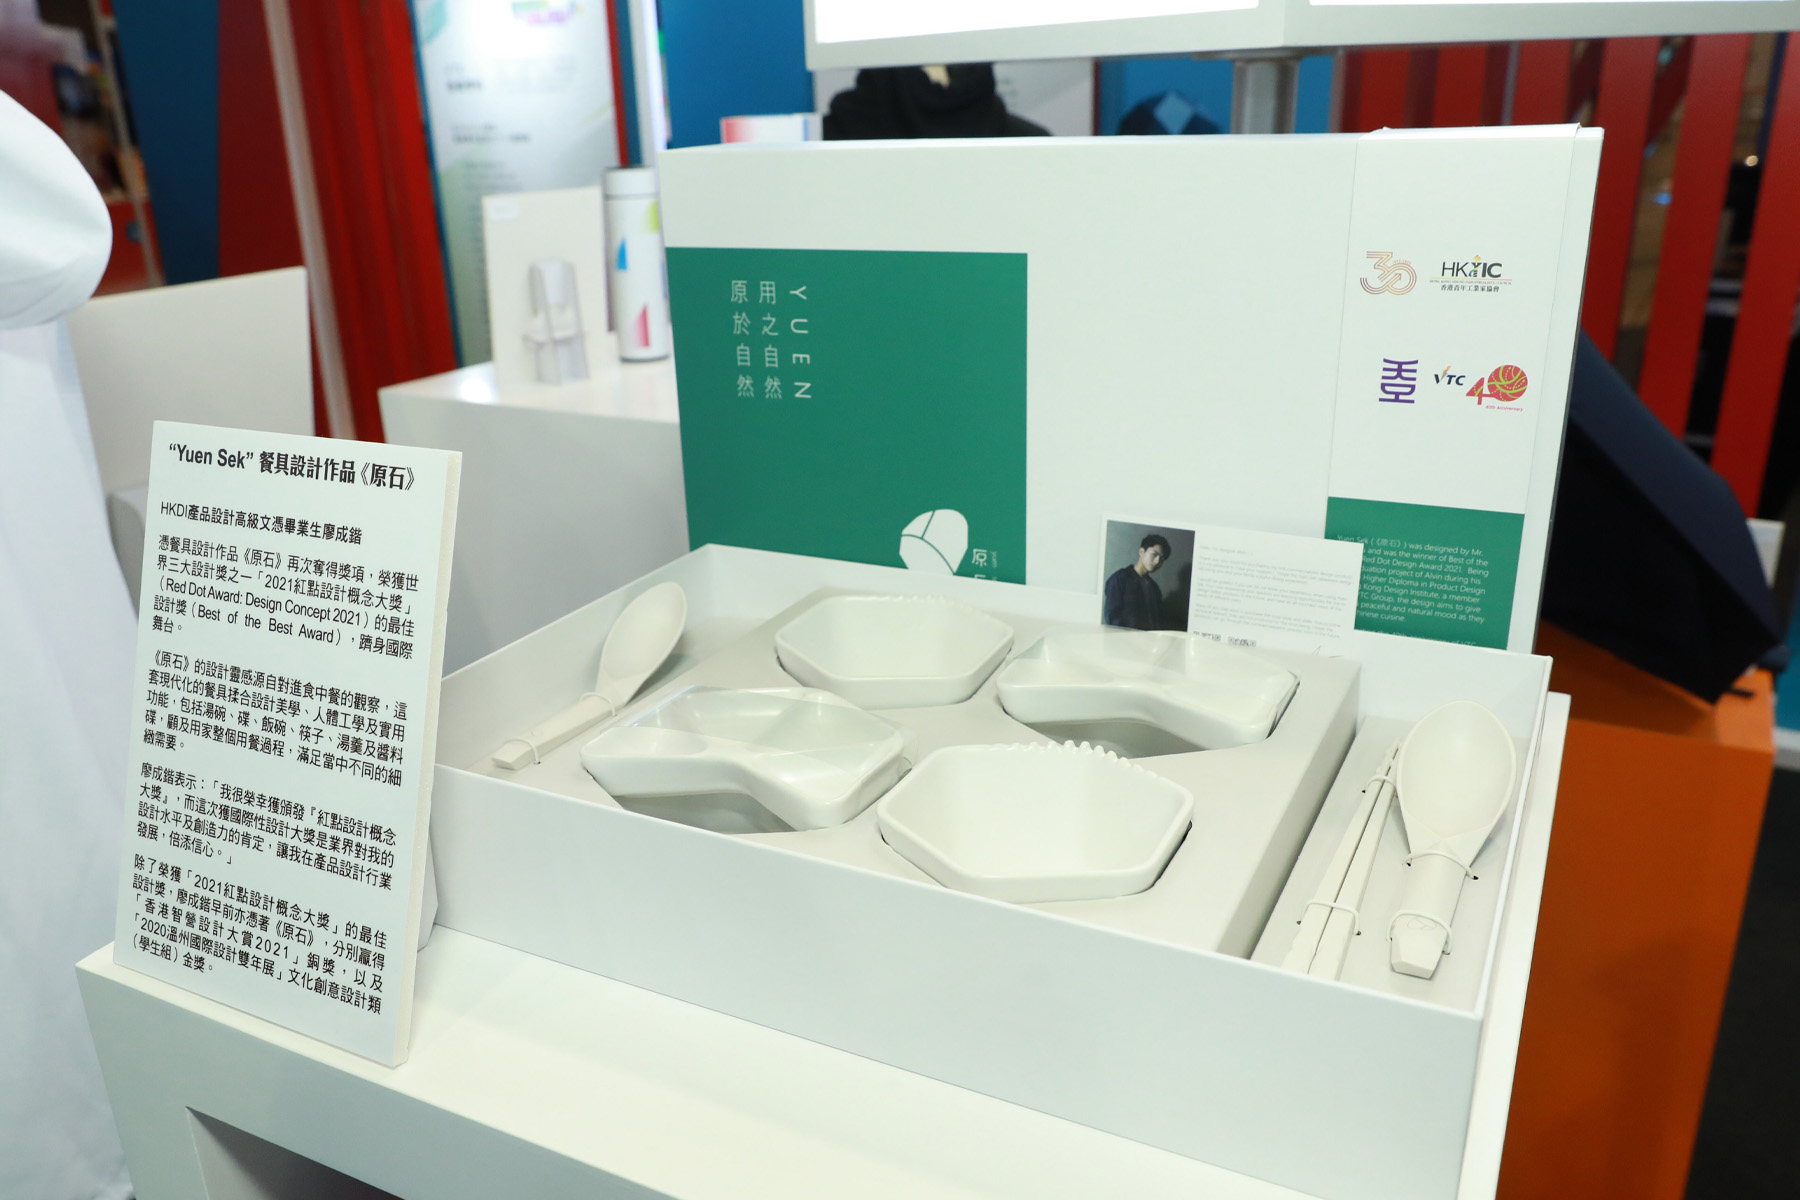 Designed by Alvin LIU Shing-kai, graduate of HKDI’s Higher Diploma in Product Design programme, the “Yuen Sek” tableware series won the “Red Dot: Best of the Best Award 2021”